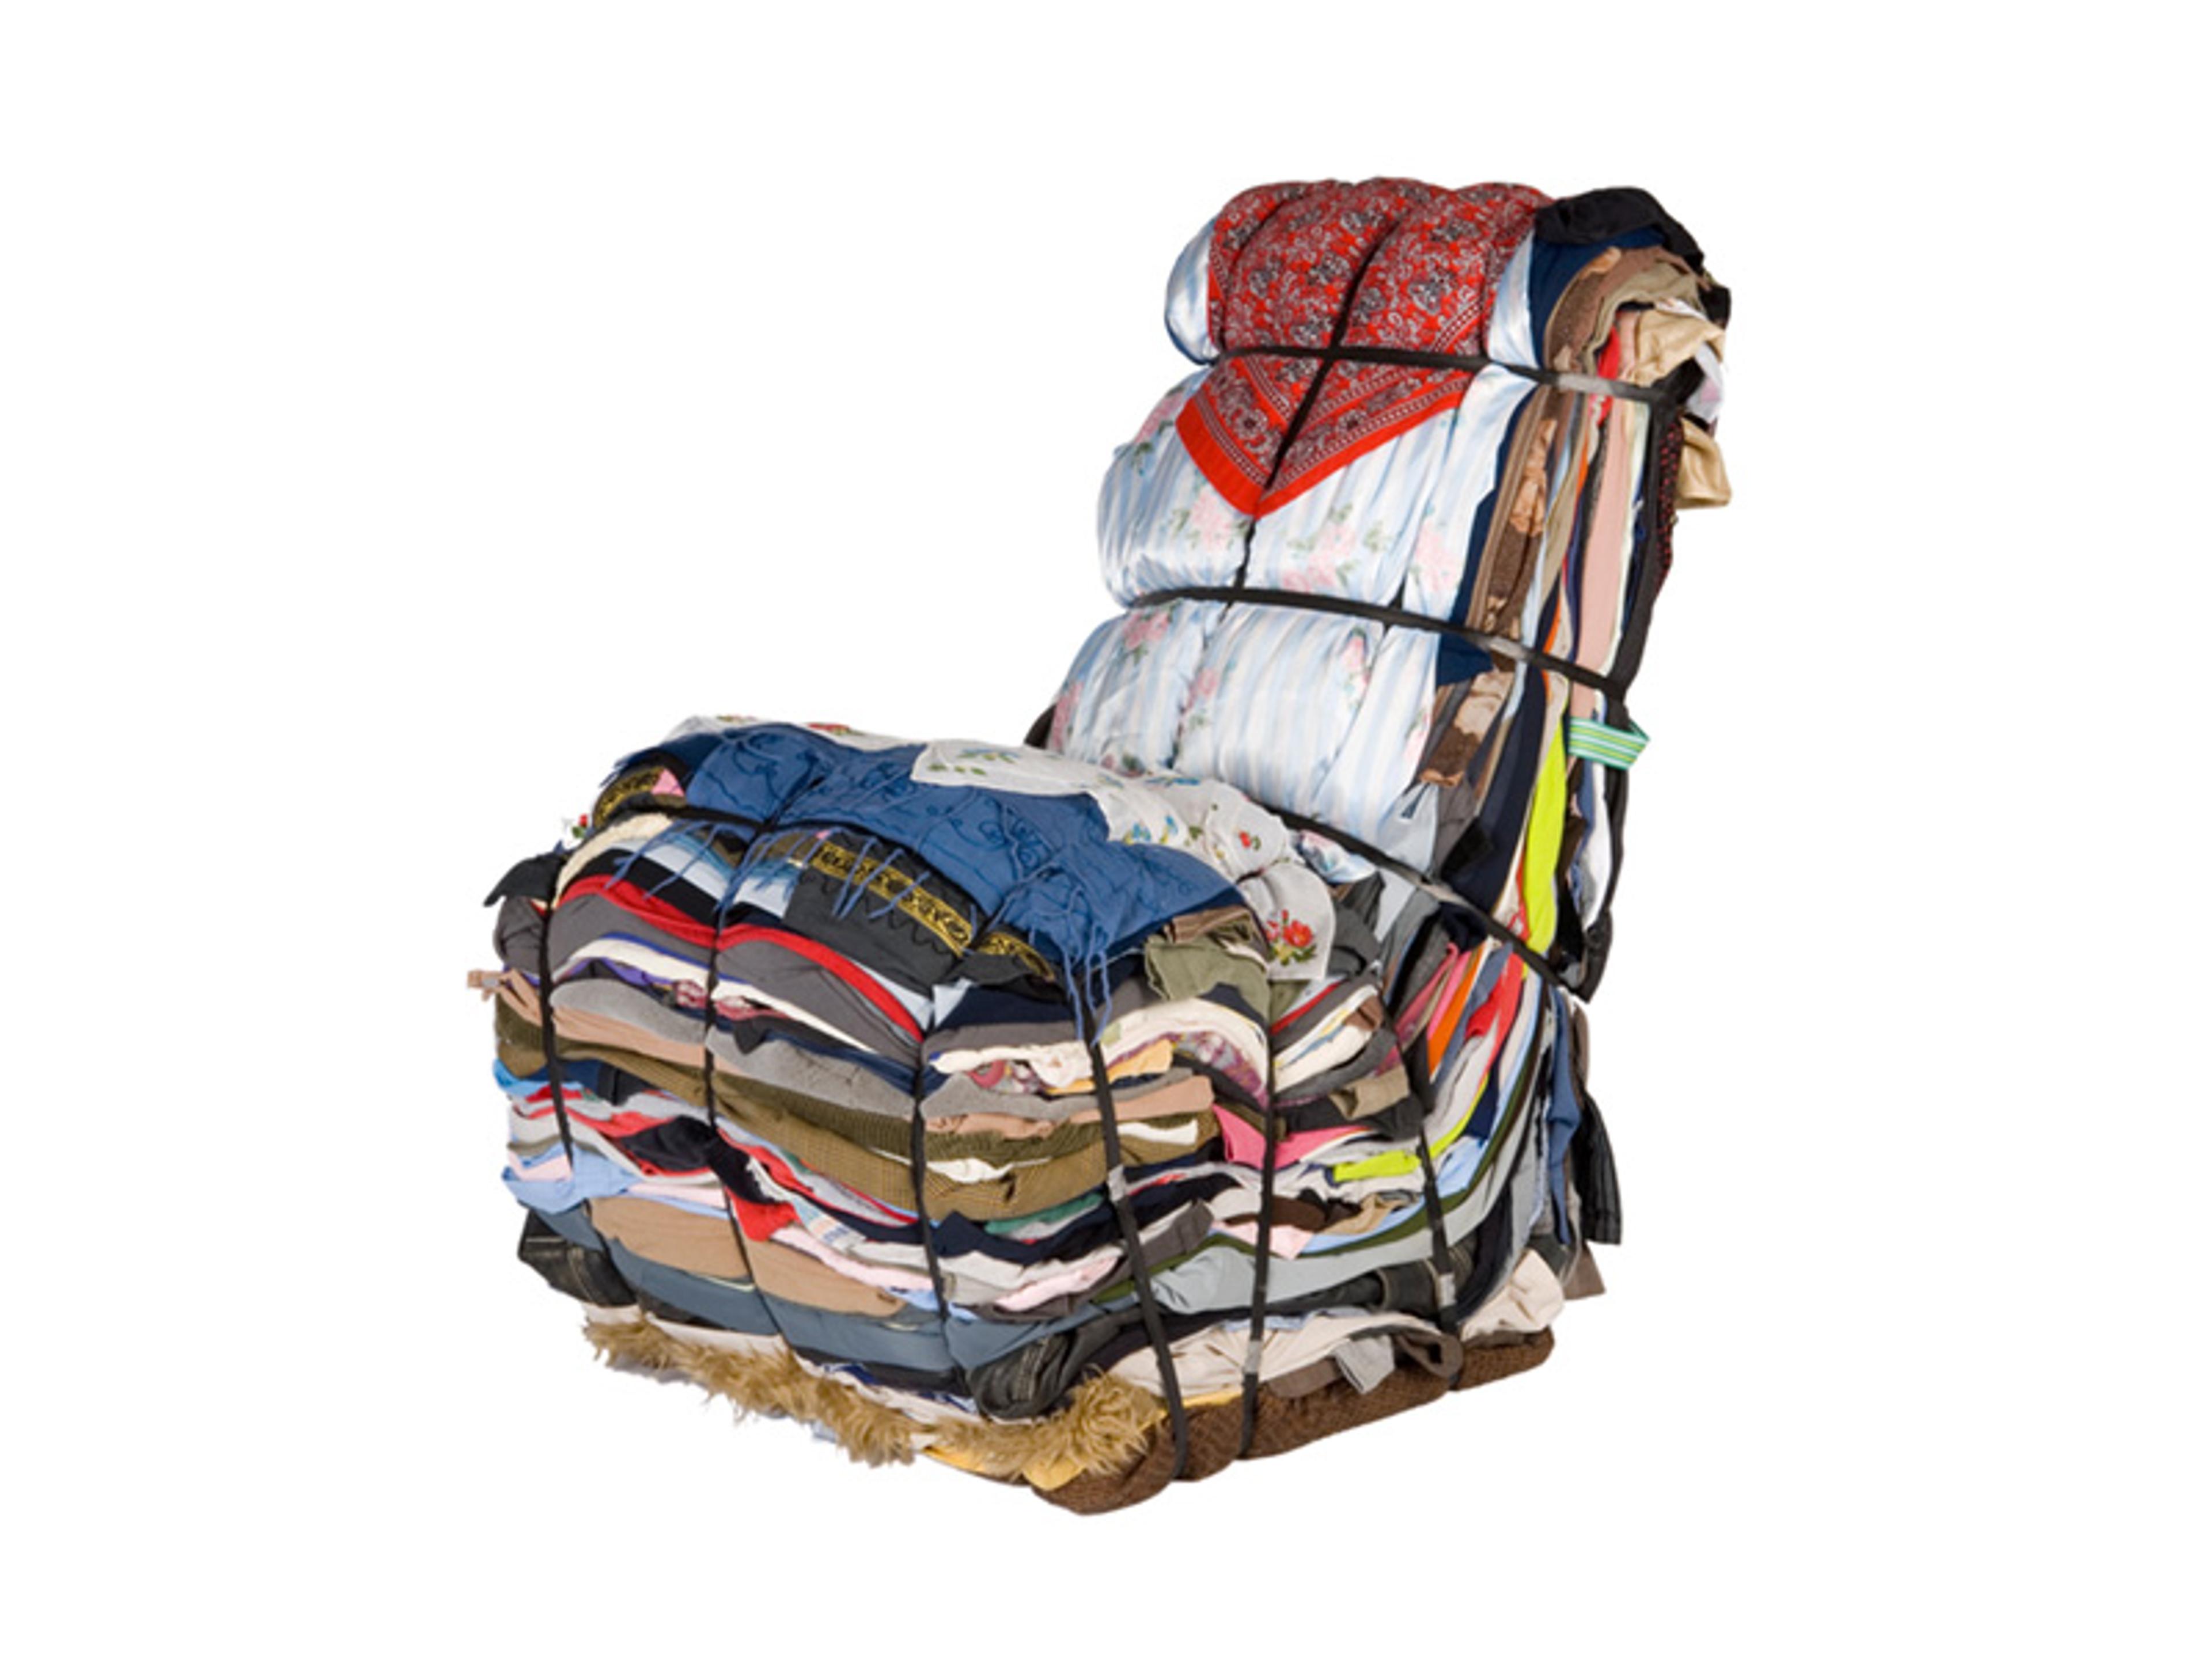 A chair made up of colourful, assorted clothes tightly bound together with black straps, creating a visually interesting and unique piece of furniture on a white background.